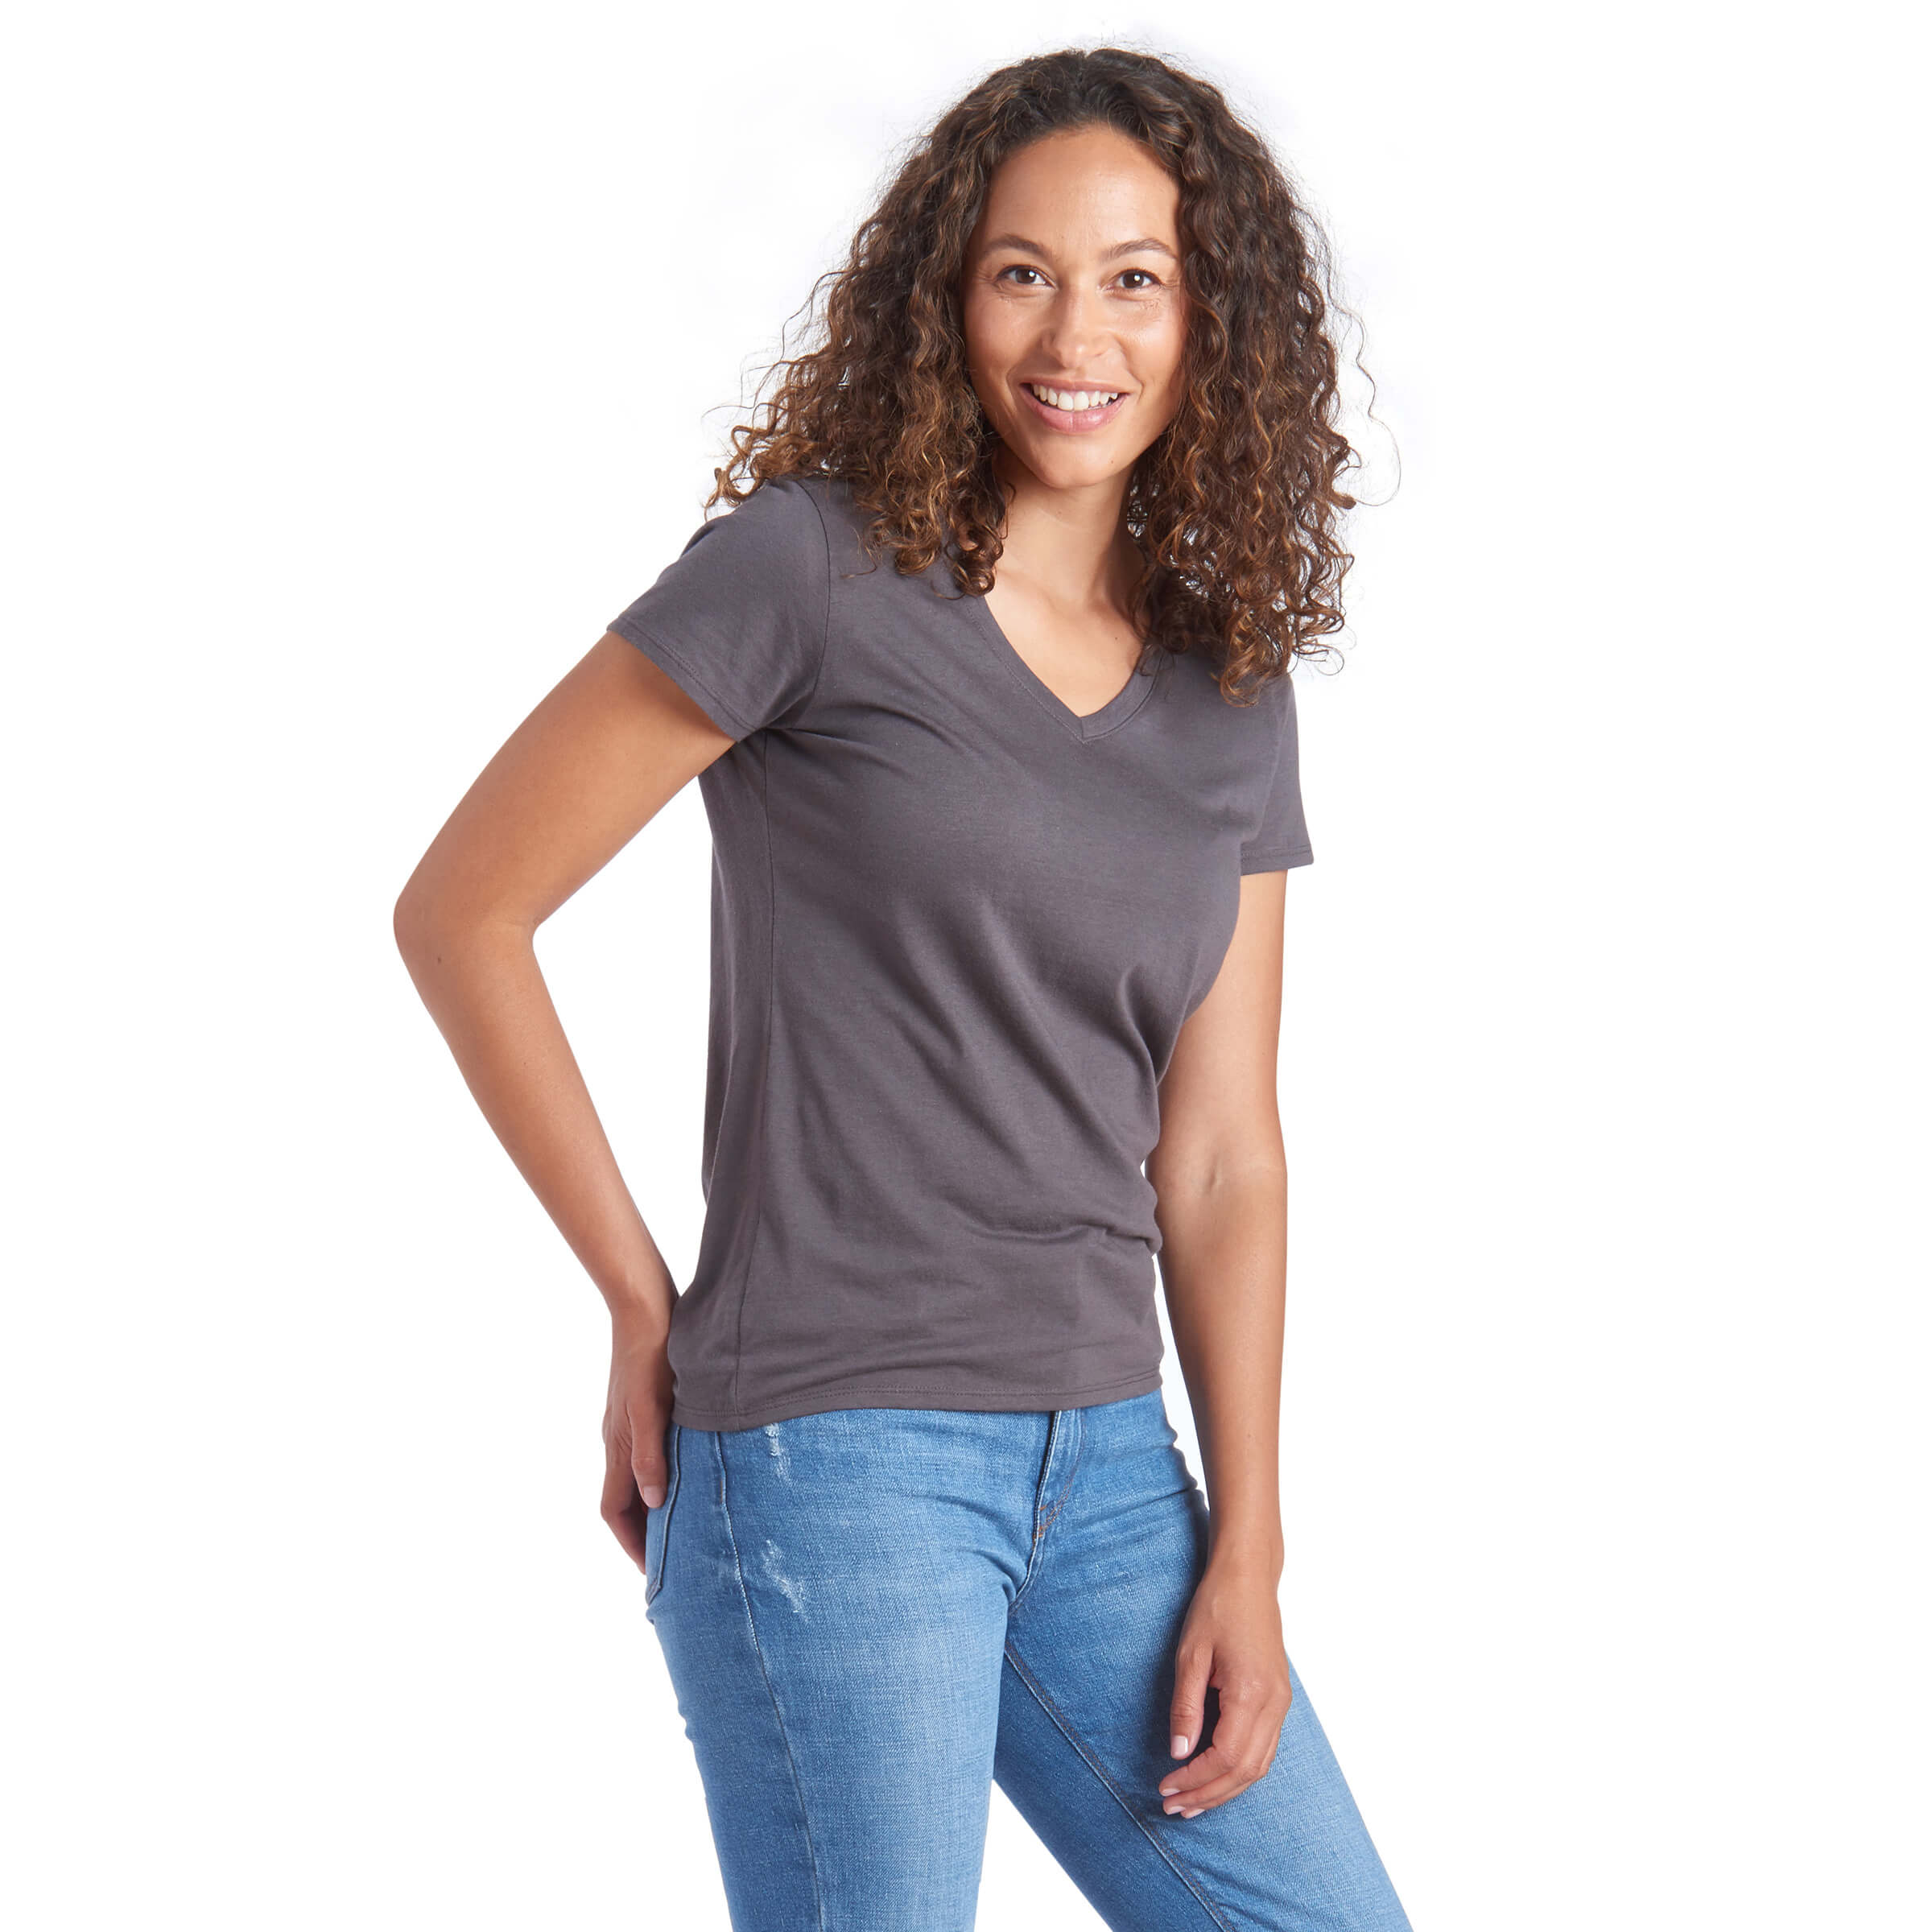 Women wearing Gris Nuit Fitted V-Neck Marcy Tee